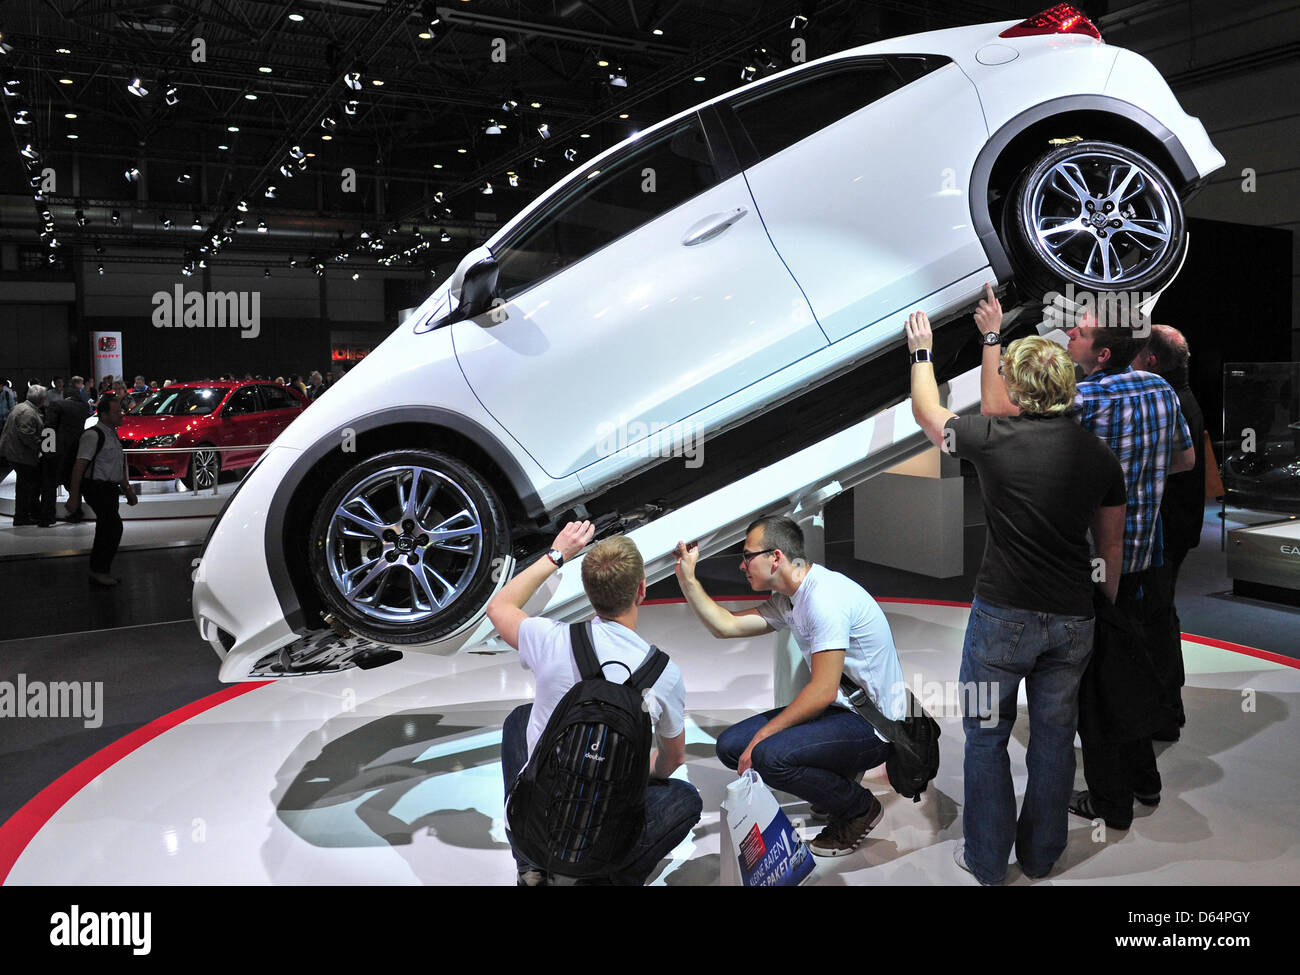 Visitors stroll around exhibited cars and motor vehicles of car manufacturer Honda, featuring also the Honda Civic, at the automobile fair AMI in Leipzig, Germany, 2 June 2012. German and international car manufacturers present their latest car novelties at the Leipzig trade fair centre from 2 June to 10 June 2012. Around 280,000 visitors are expeocted to attend the fair which feat Stock Photo